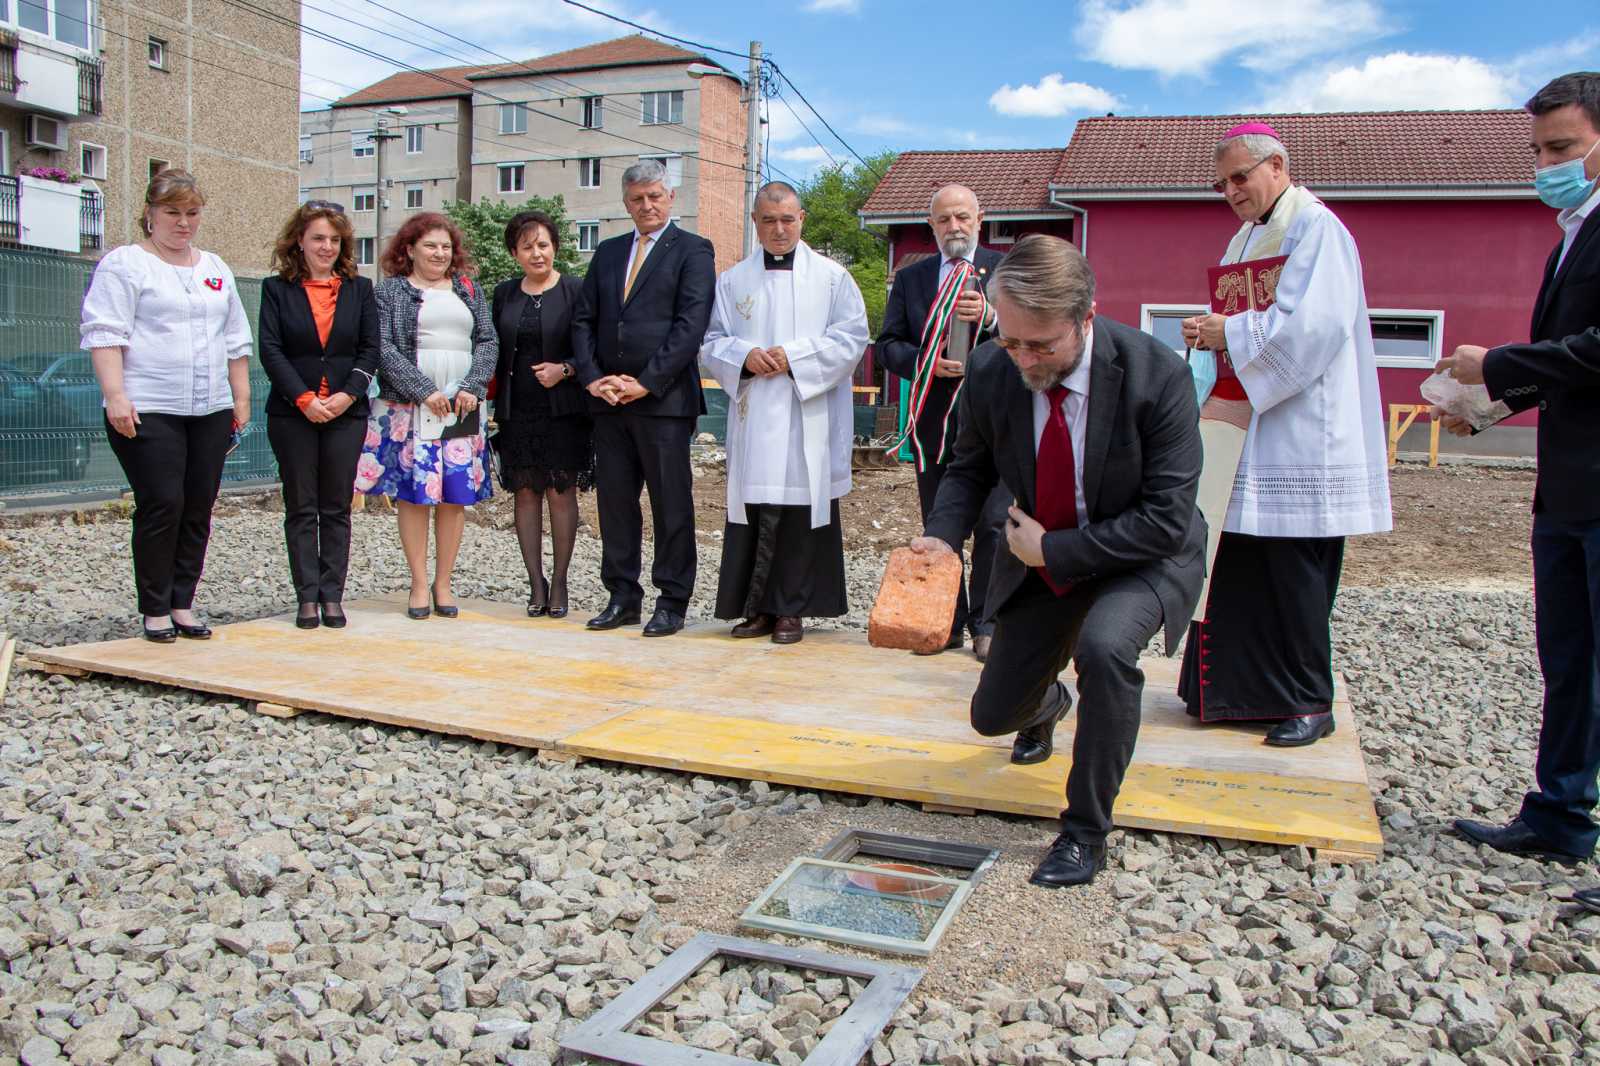 The moment of laying the cornerstone.  The bricks of the Bishop's Palace were laid by Member of Parliament Ödön Szabó